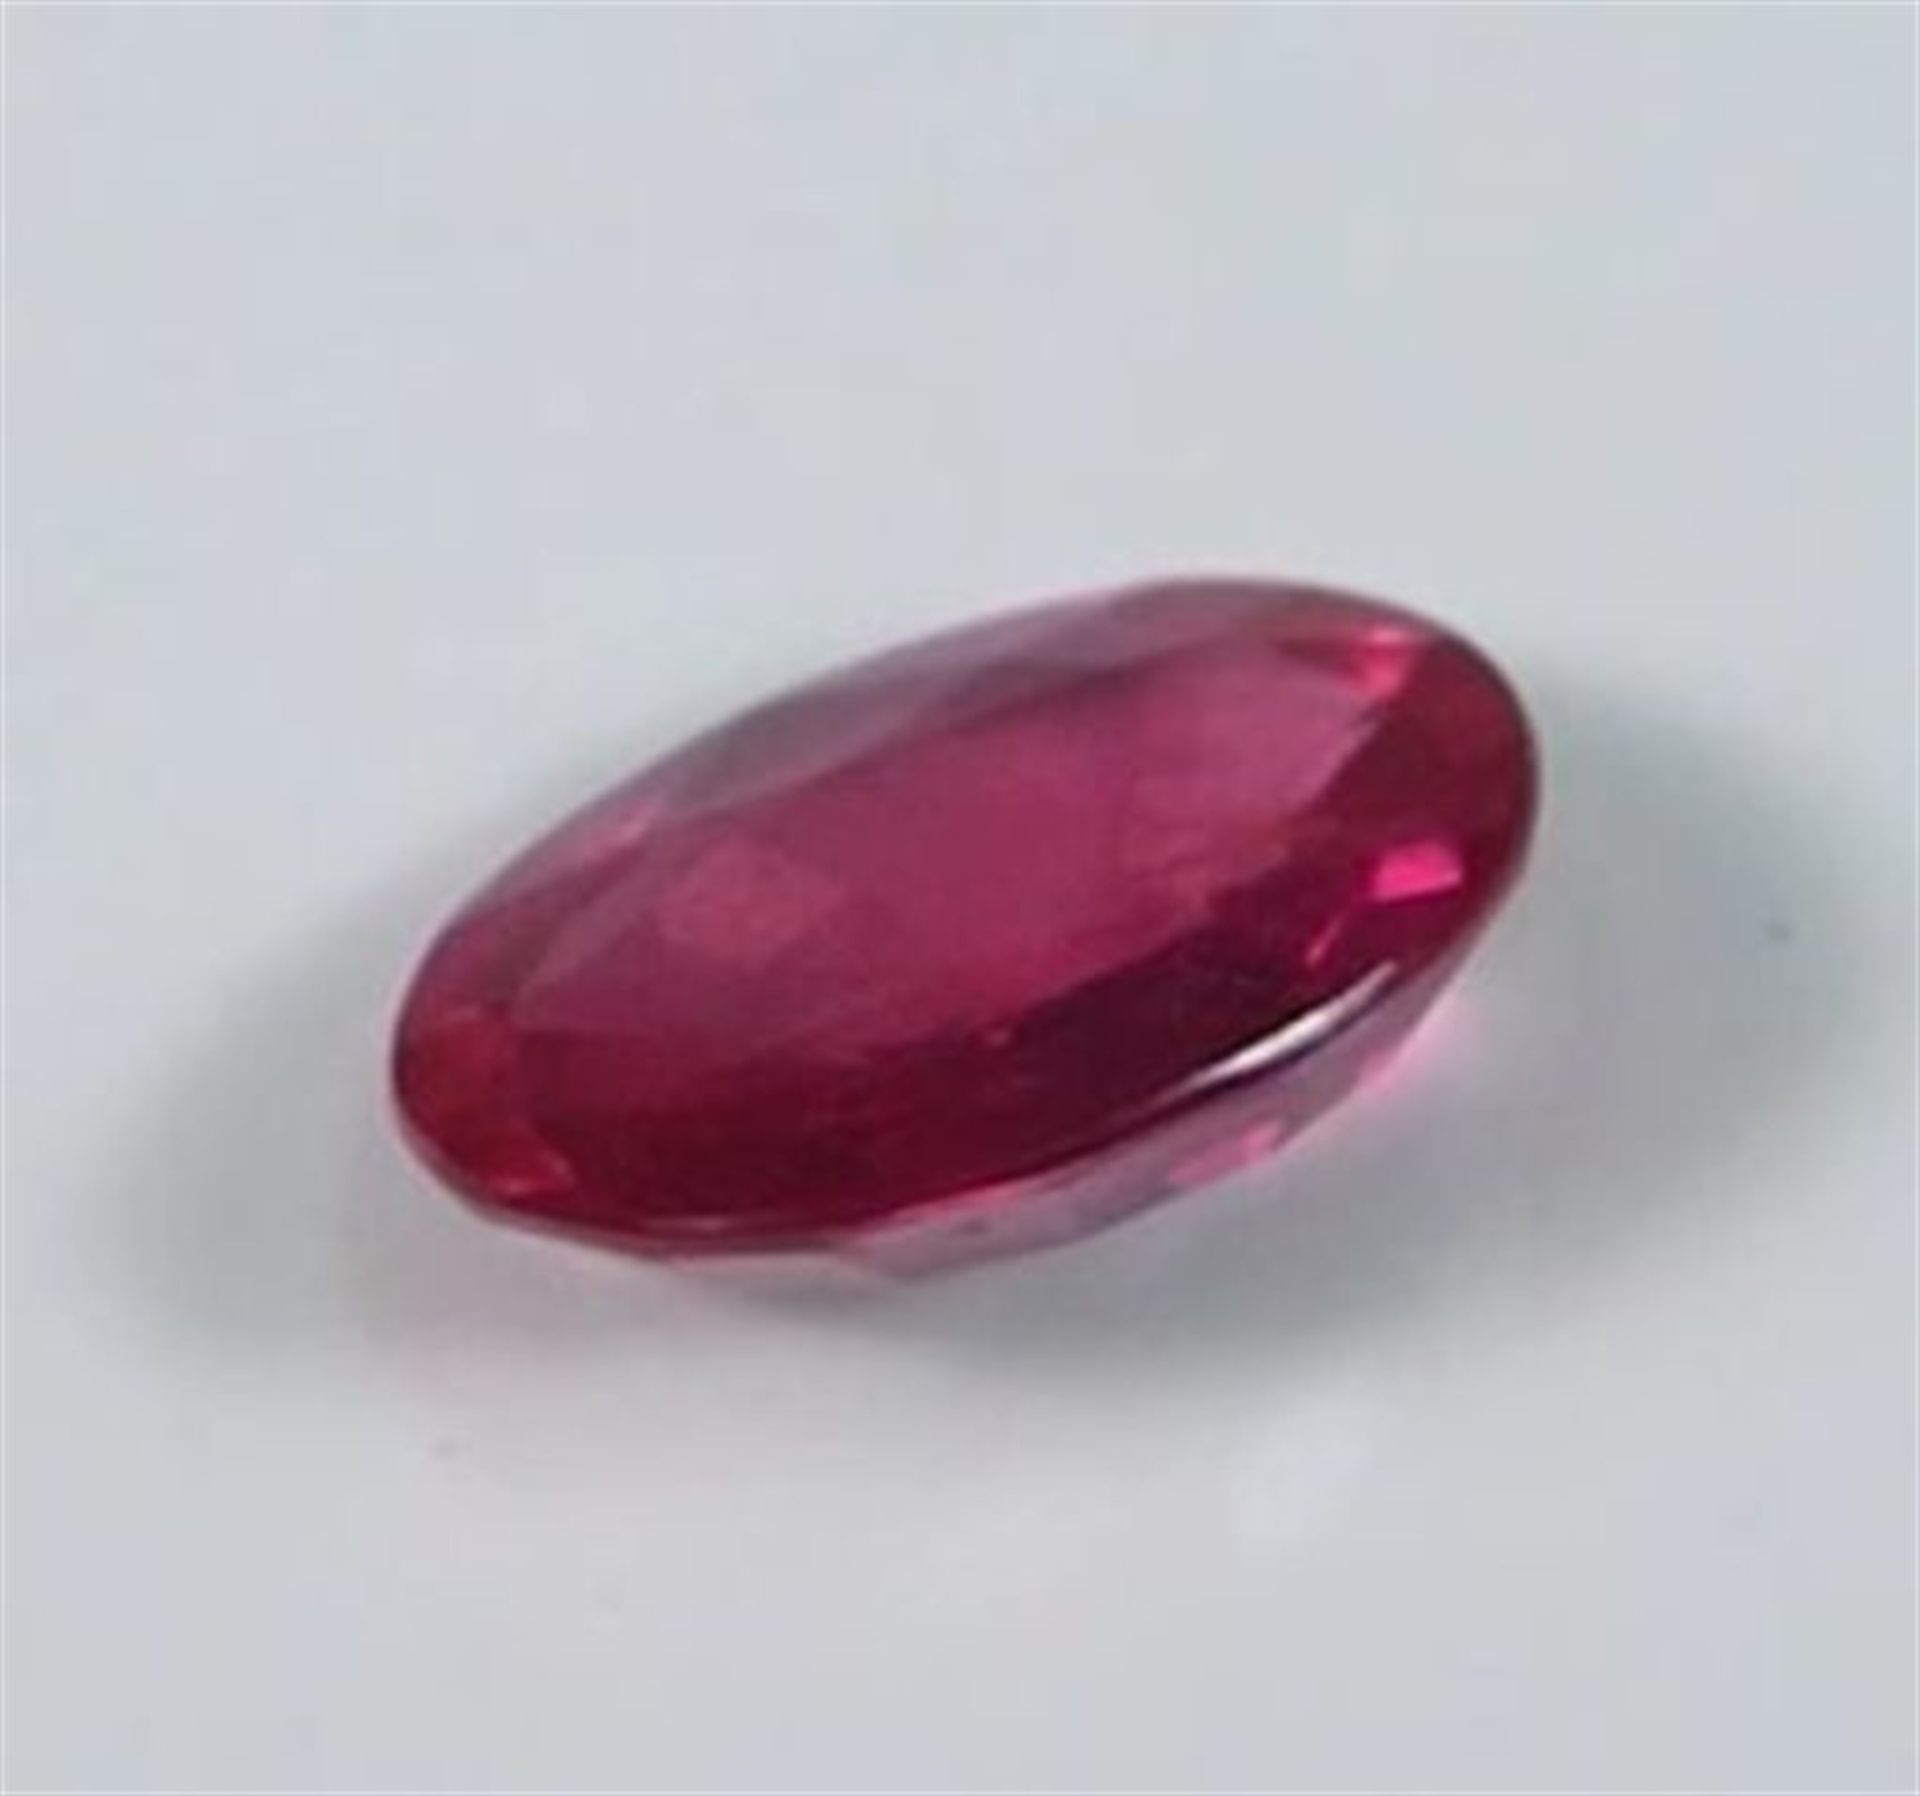 GIA Certified 1.22 ct. Untreated Ruby - BURMA - Image 7 of 10